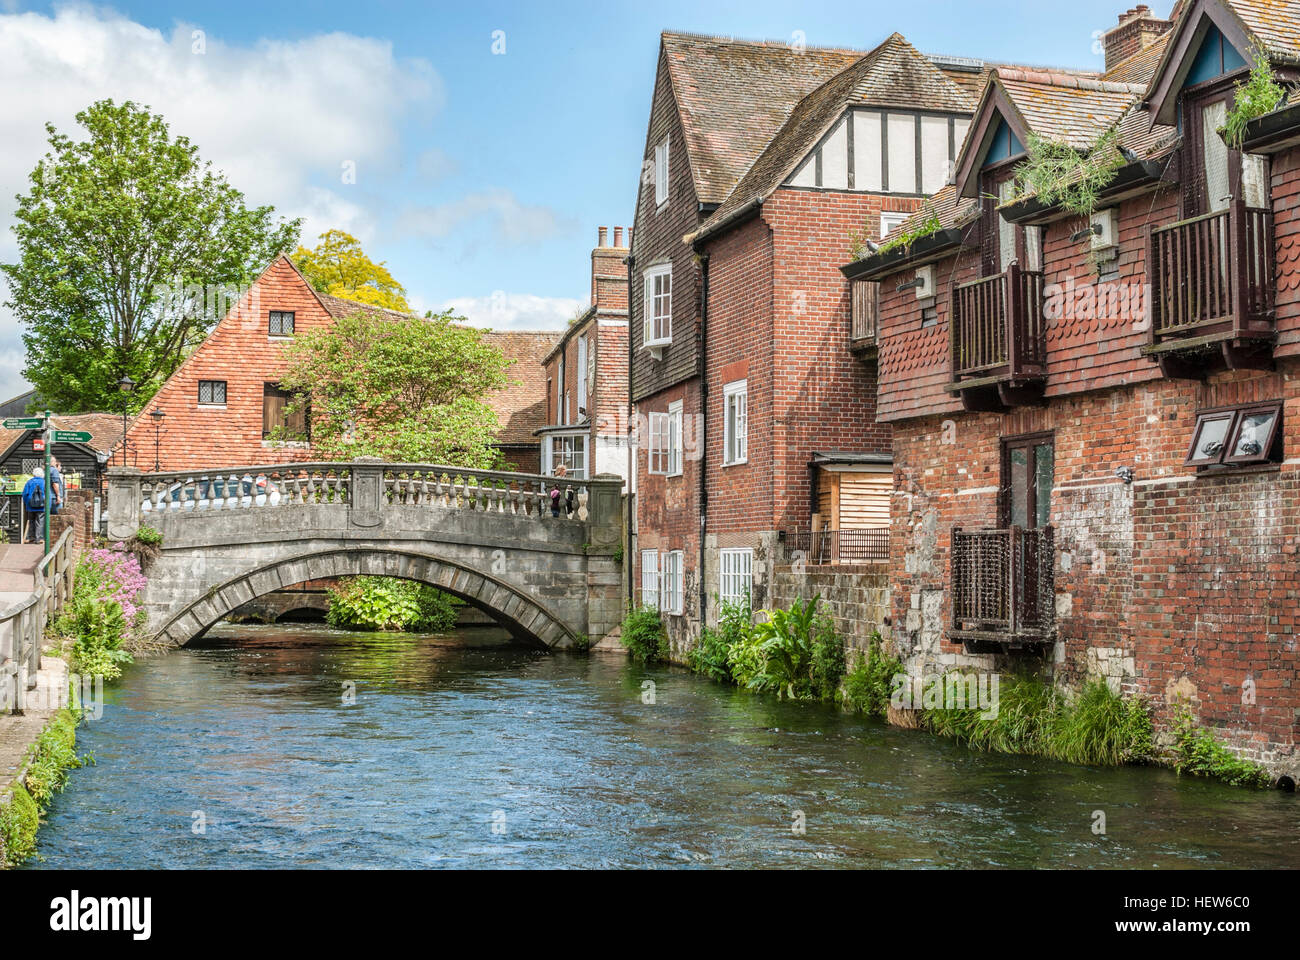 River Itchen running through the historical old town center of Winchester England Stock Photo